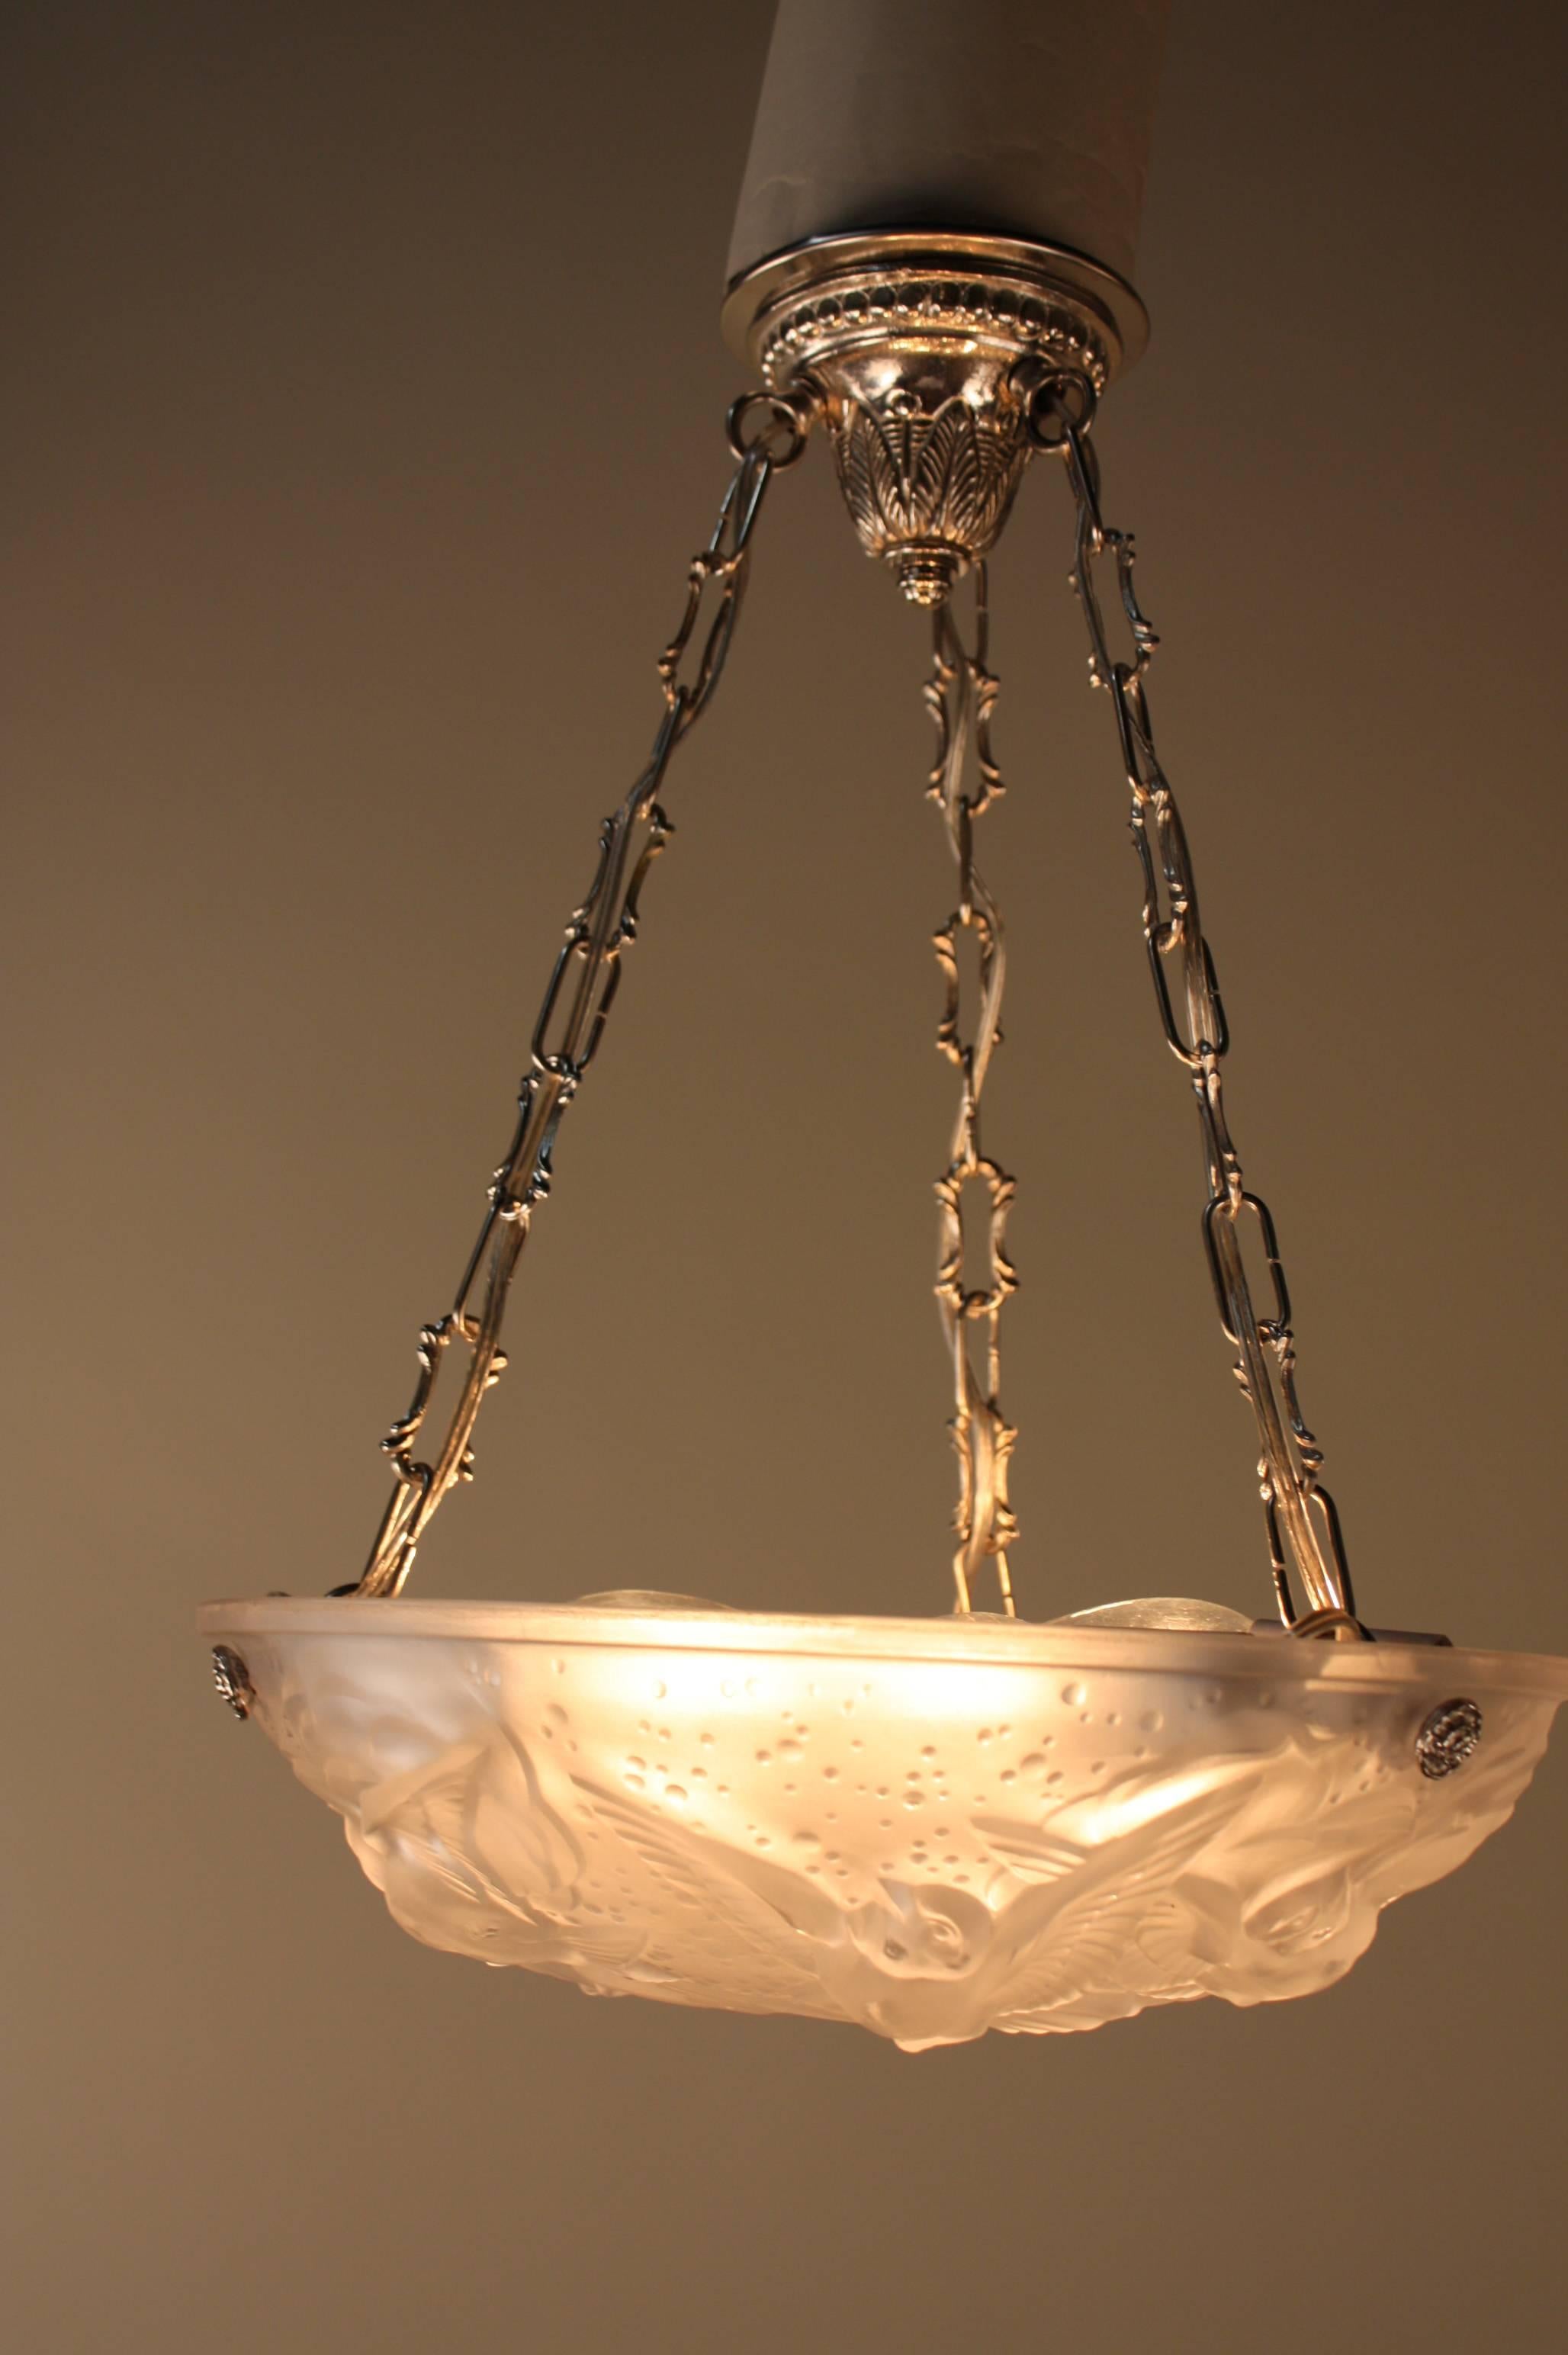 Wonderful six light Art Deco glass with flying bird's motion pendant/chandelier with nickel on bronze hardware by Muller Frères. 
We have simile chandelier in pair.